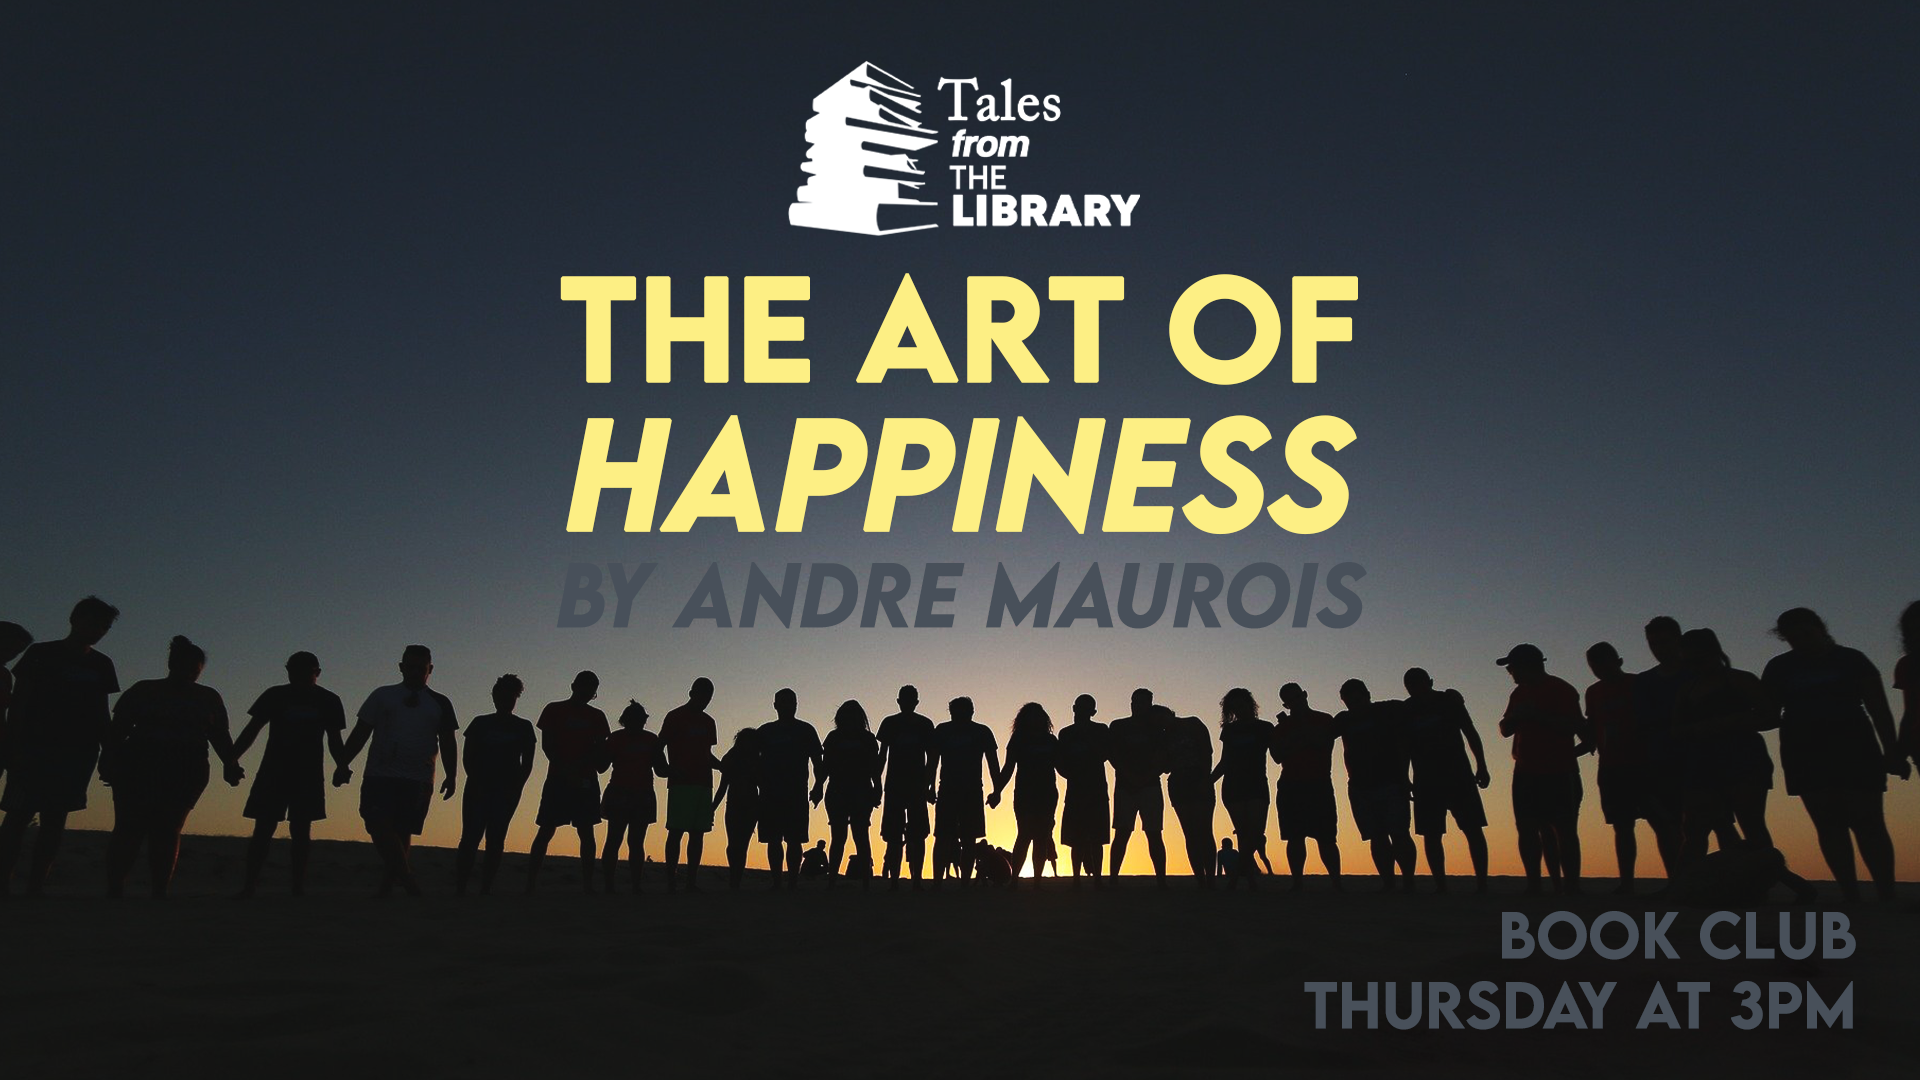 Tales From The Library - The Art of Happiness